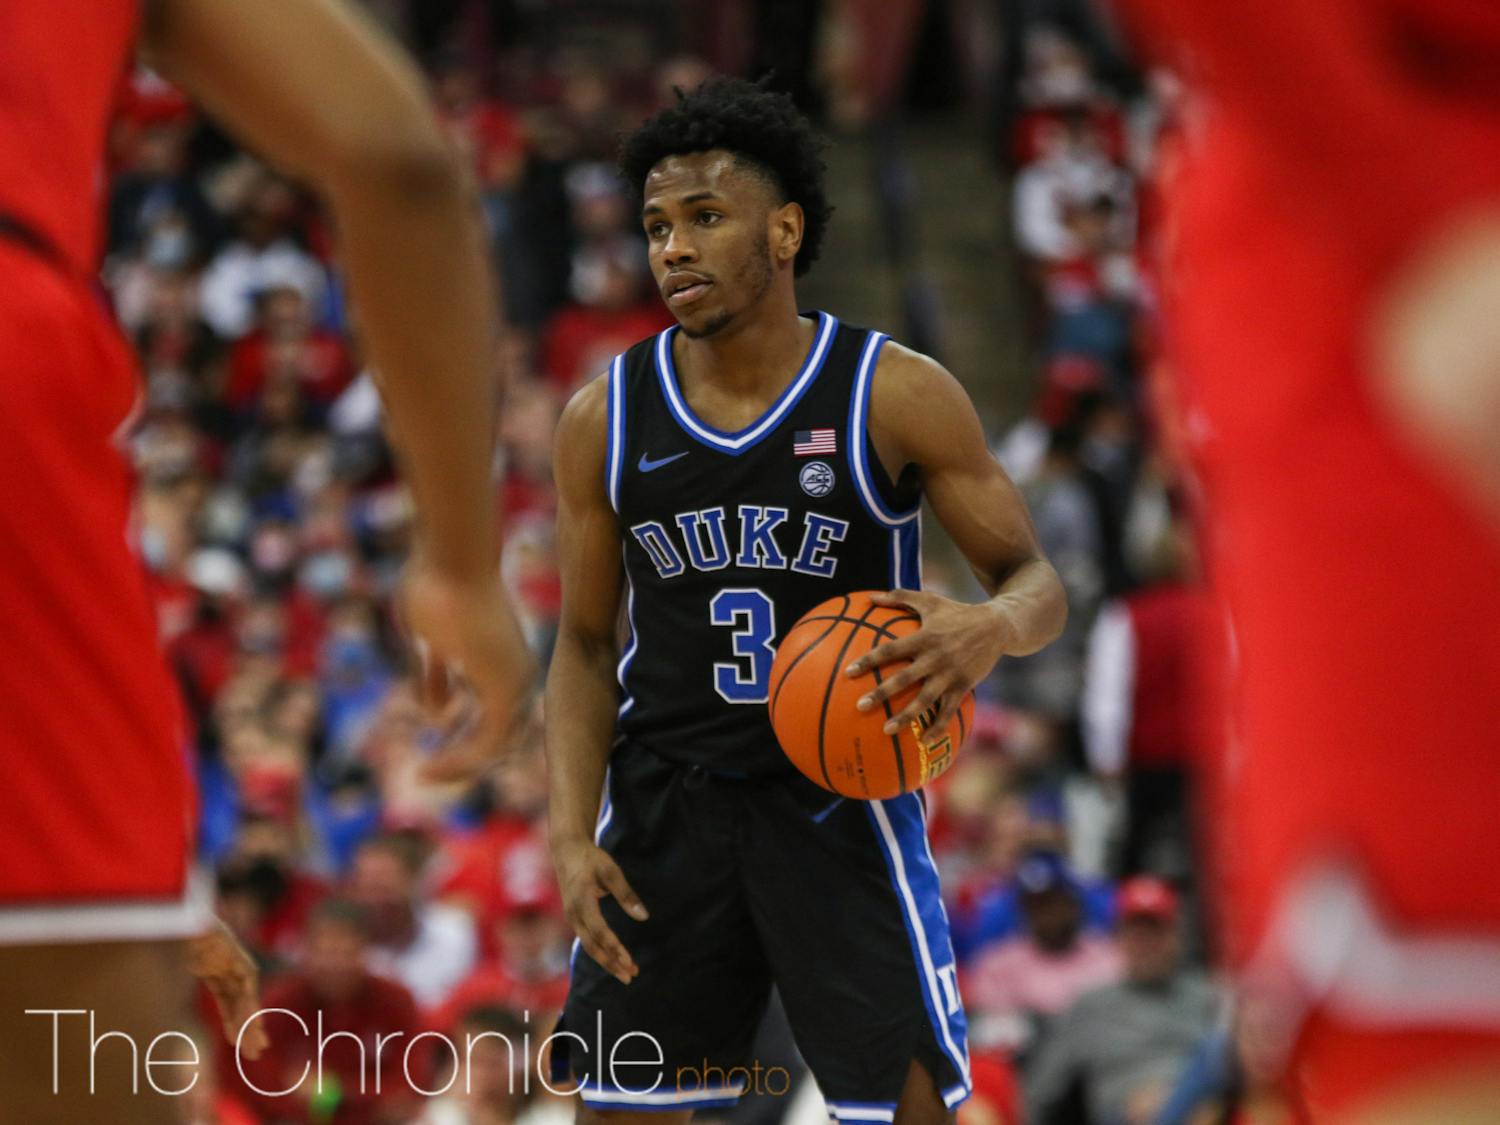 Duke men's basketball fell from the top spot in the AP Poll after losing 71-66 at Ohio State.